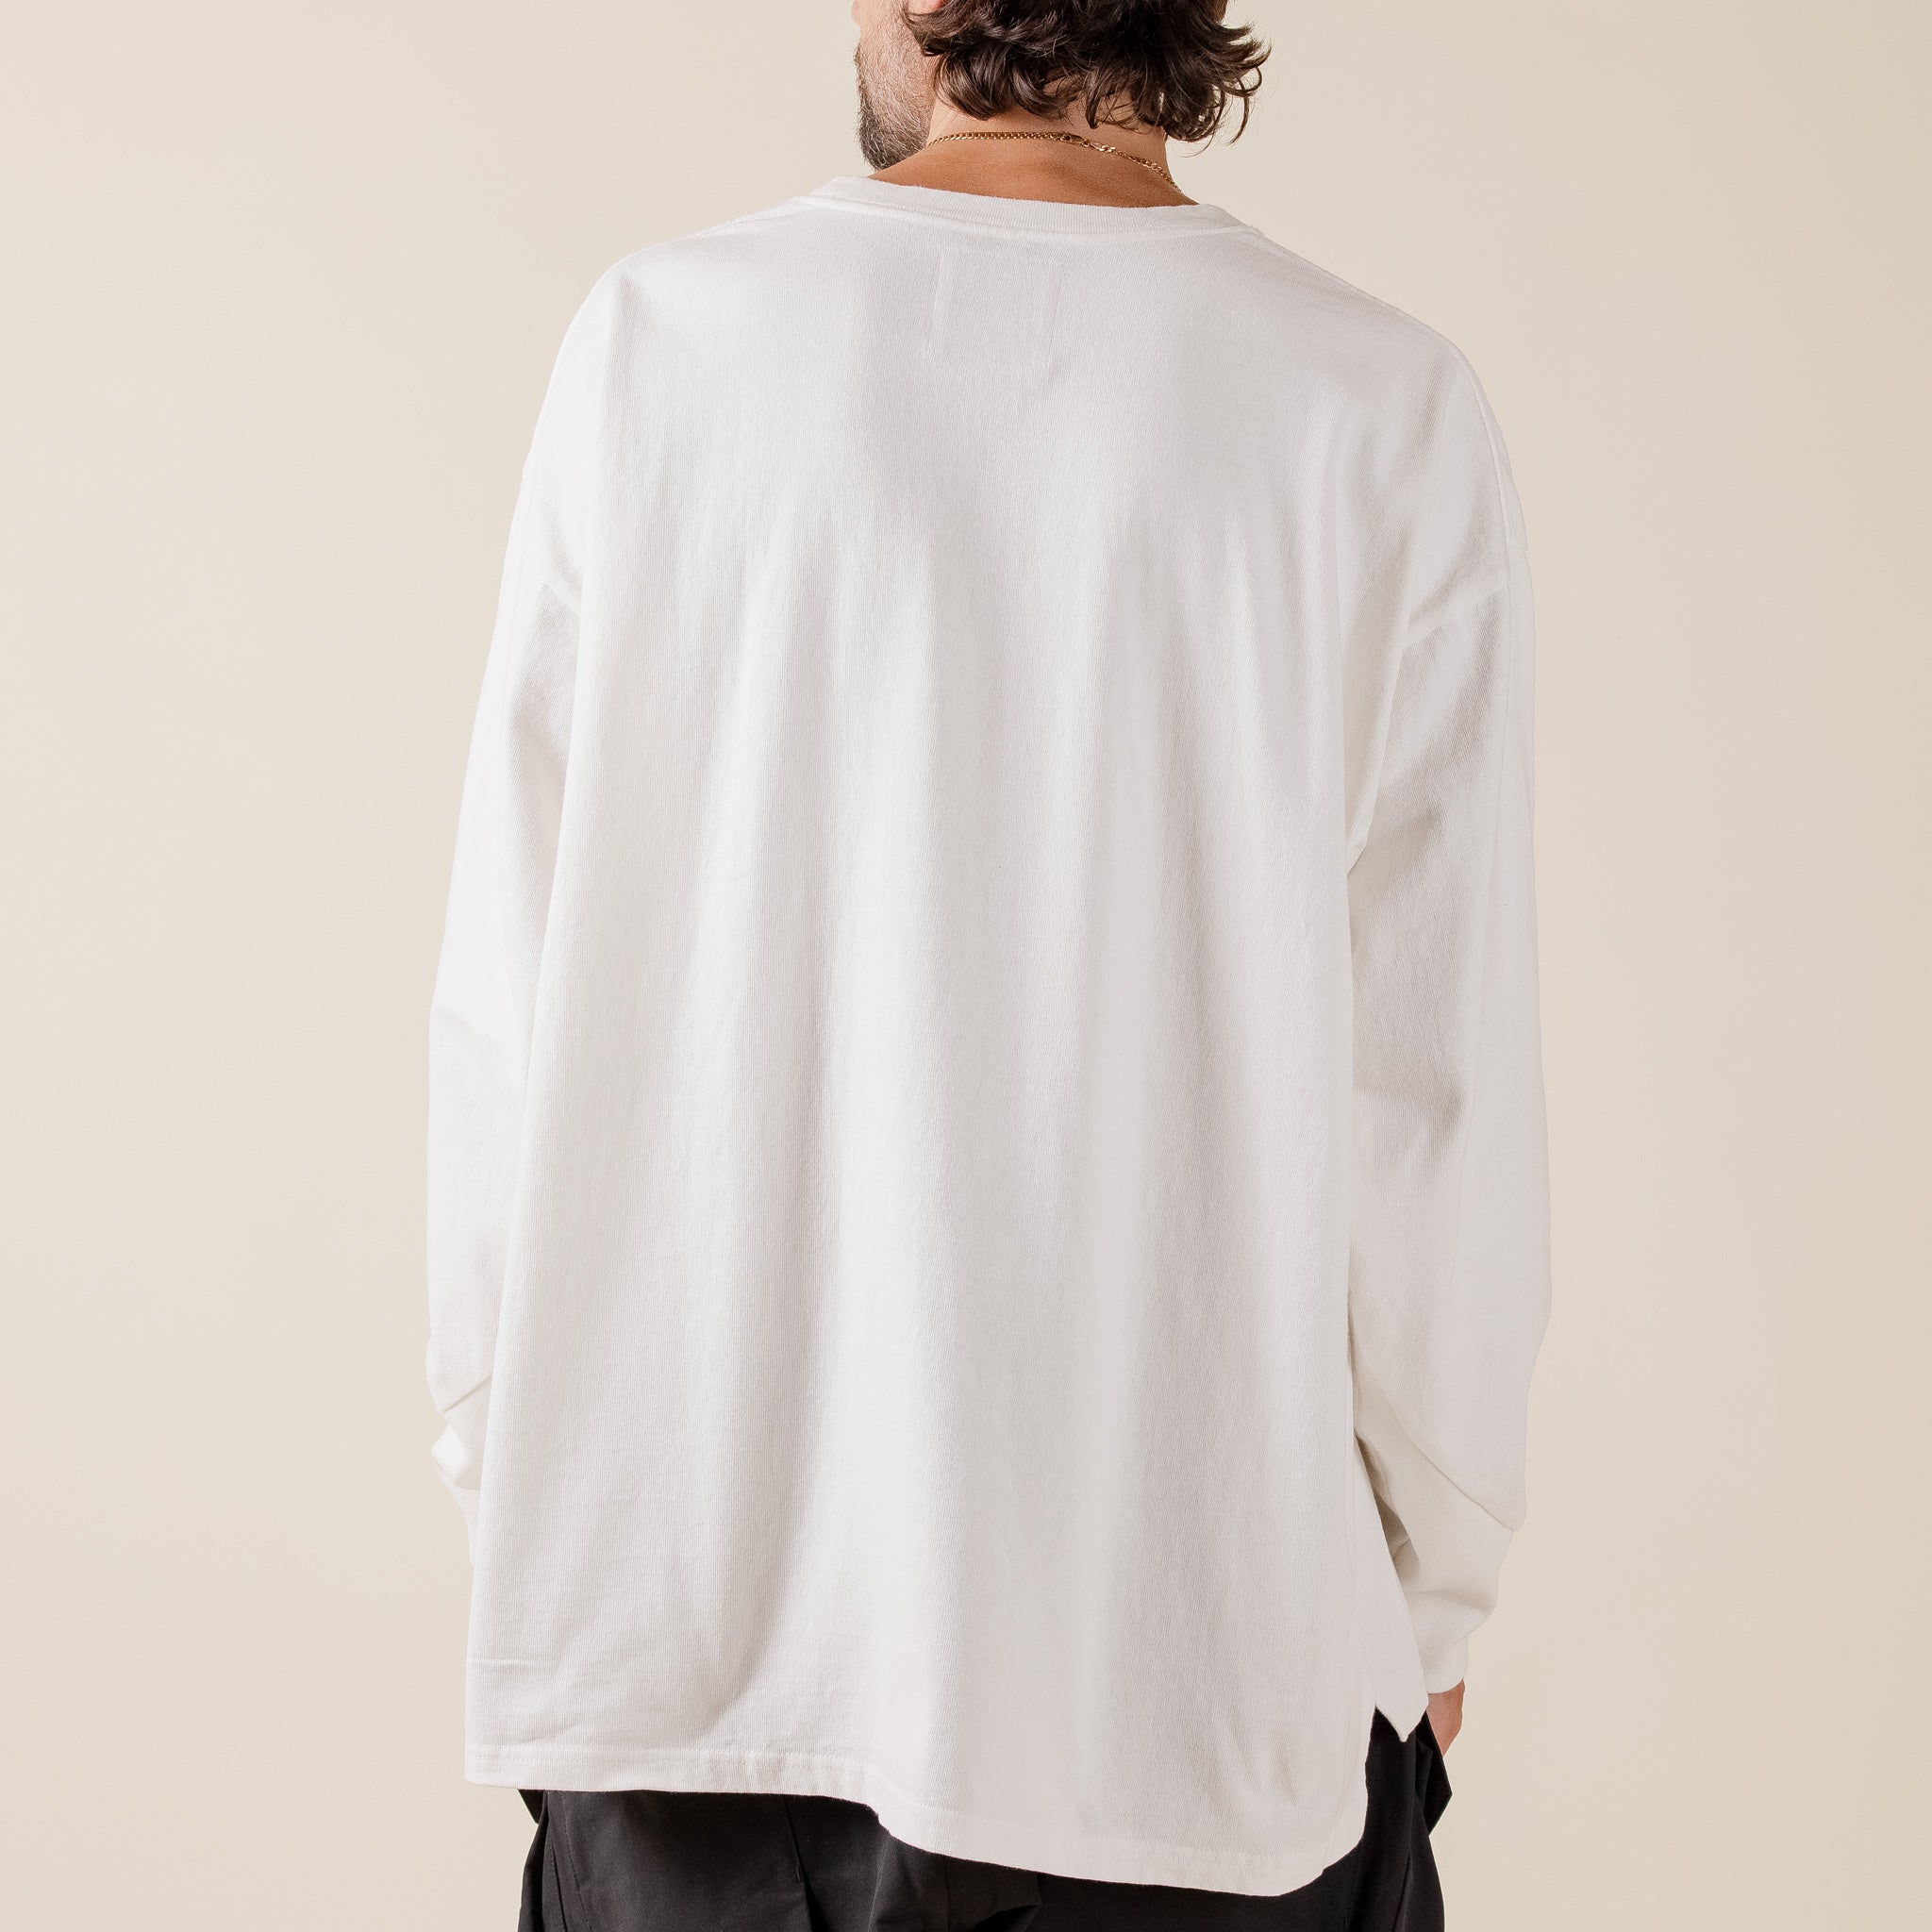 CMF Comfy Outdoor Garment - AW23 Heavy Cotton Long Sleeve T-Shirt - White